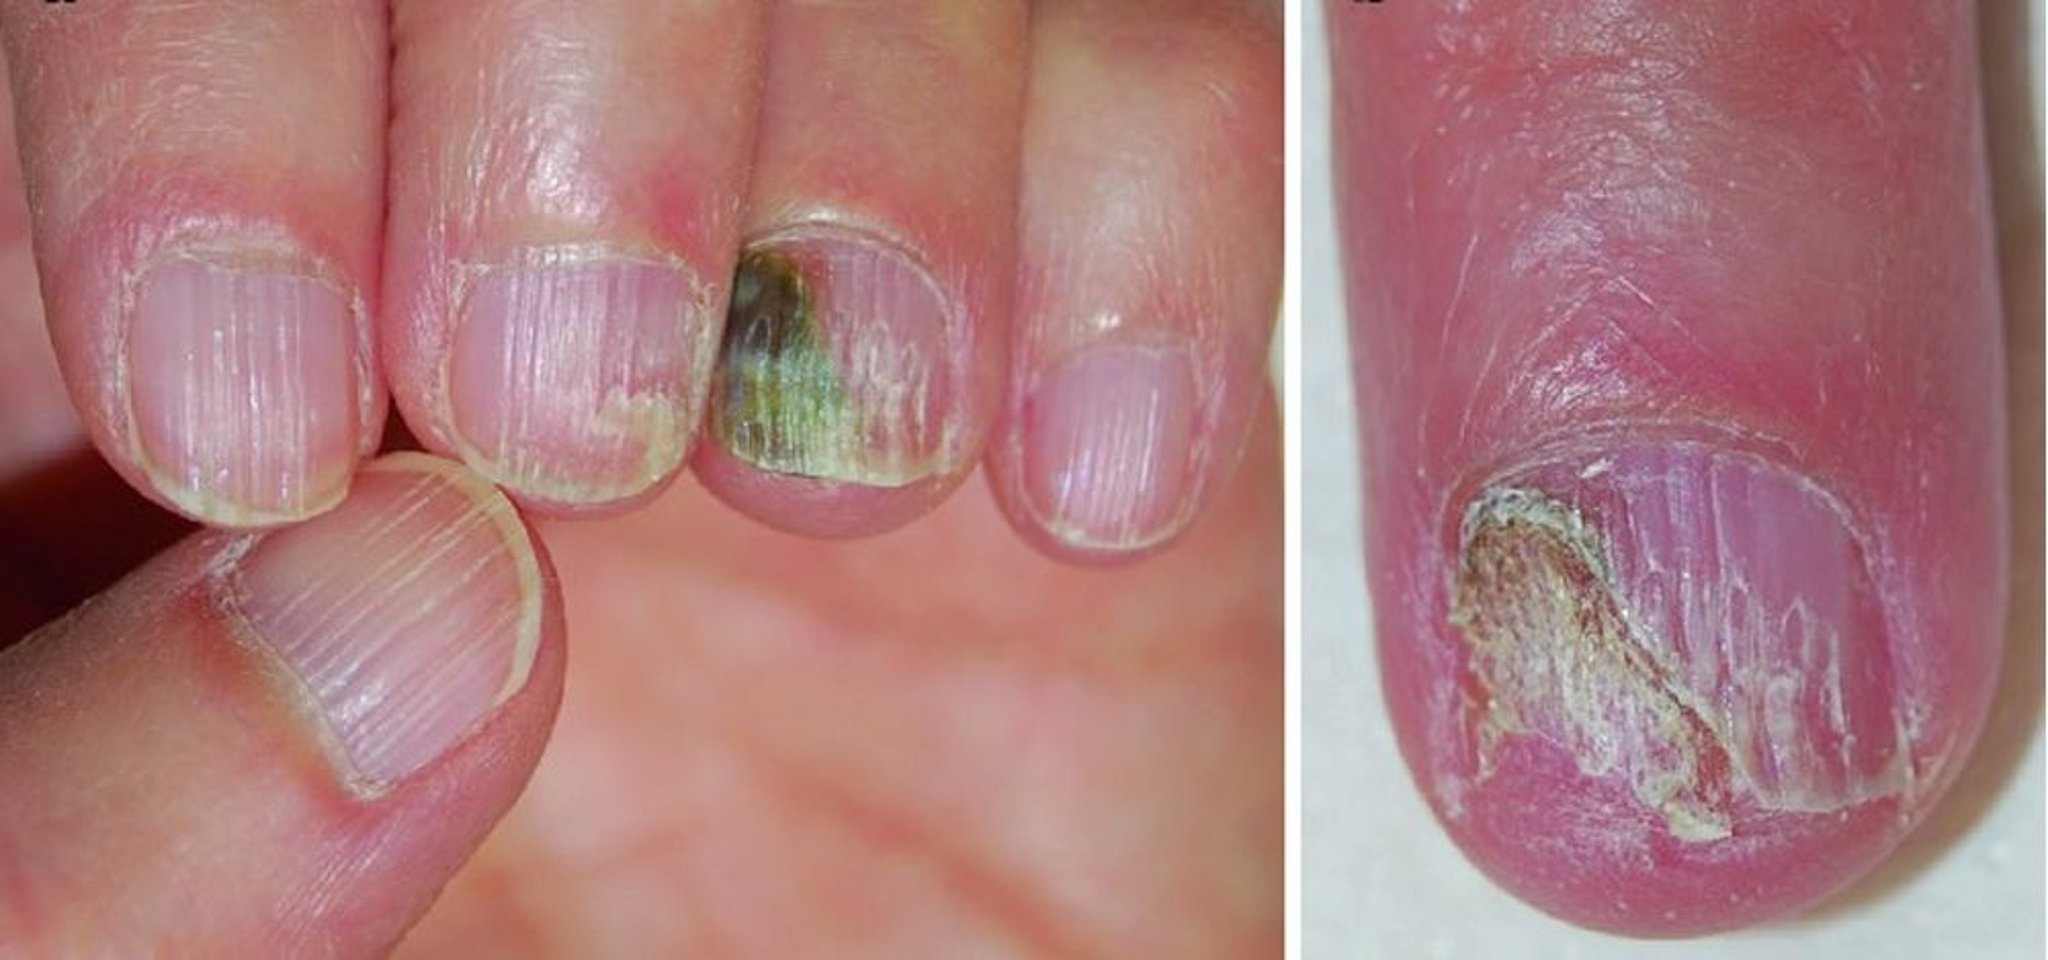 Syndrome des ongles verts